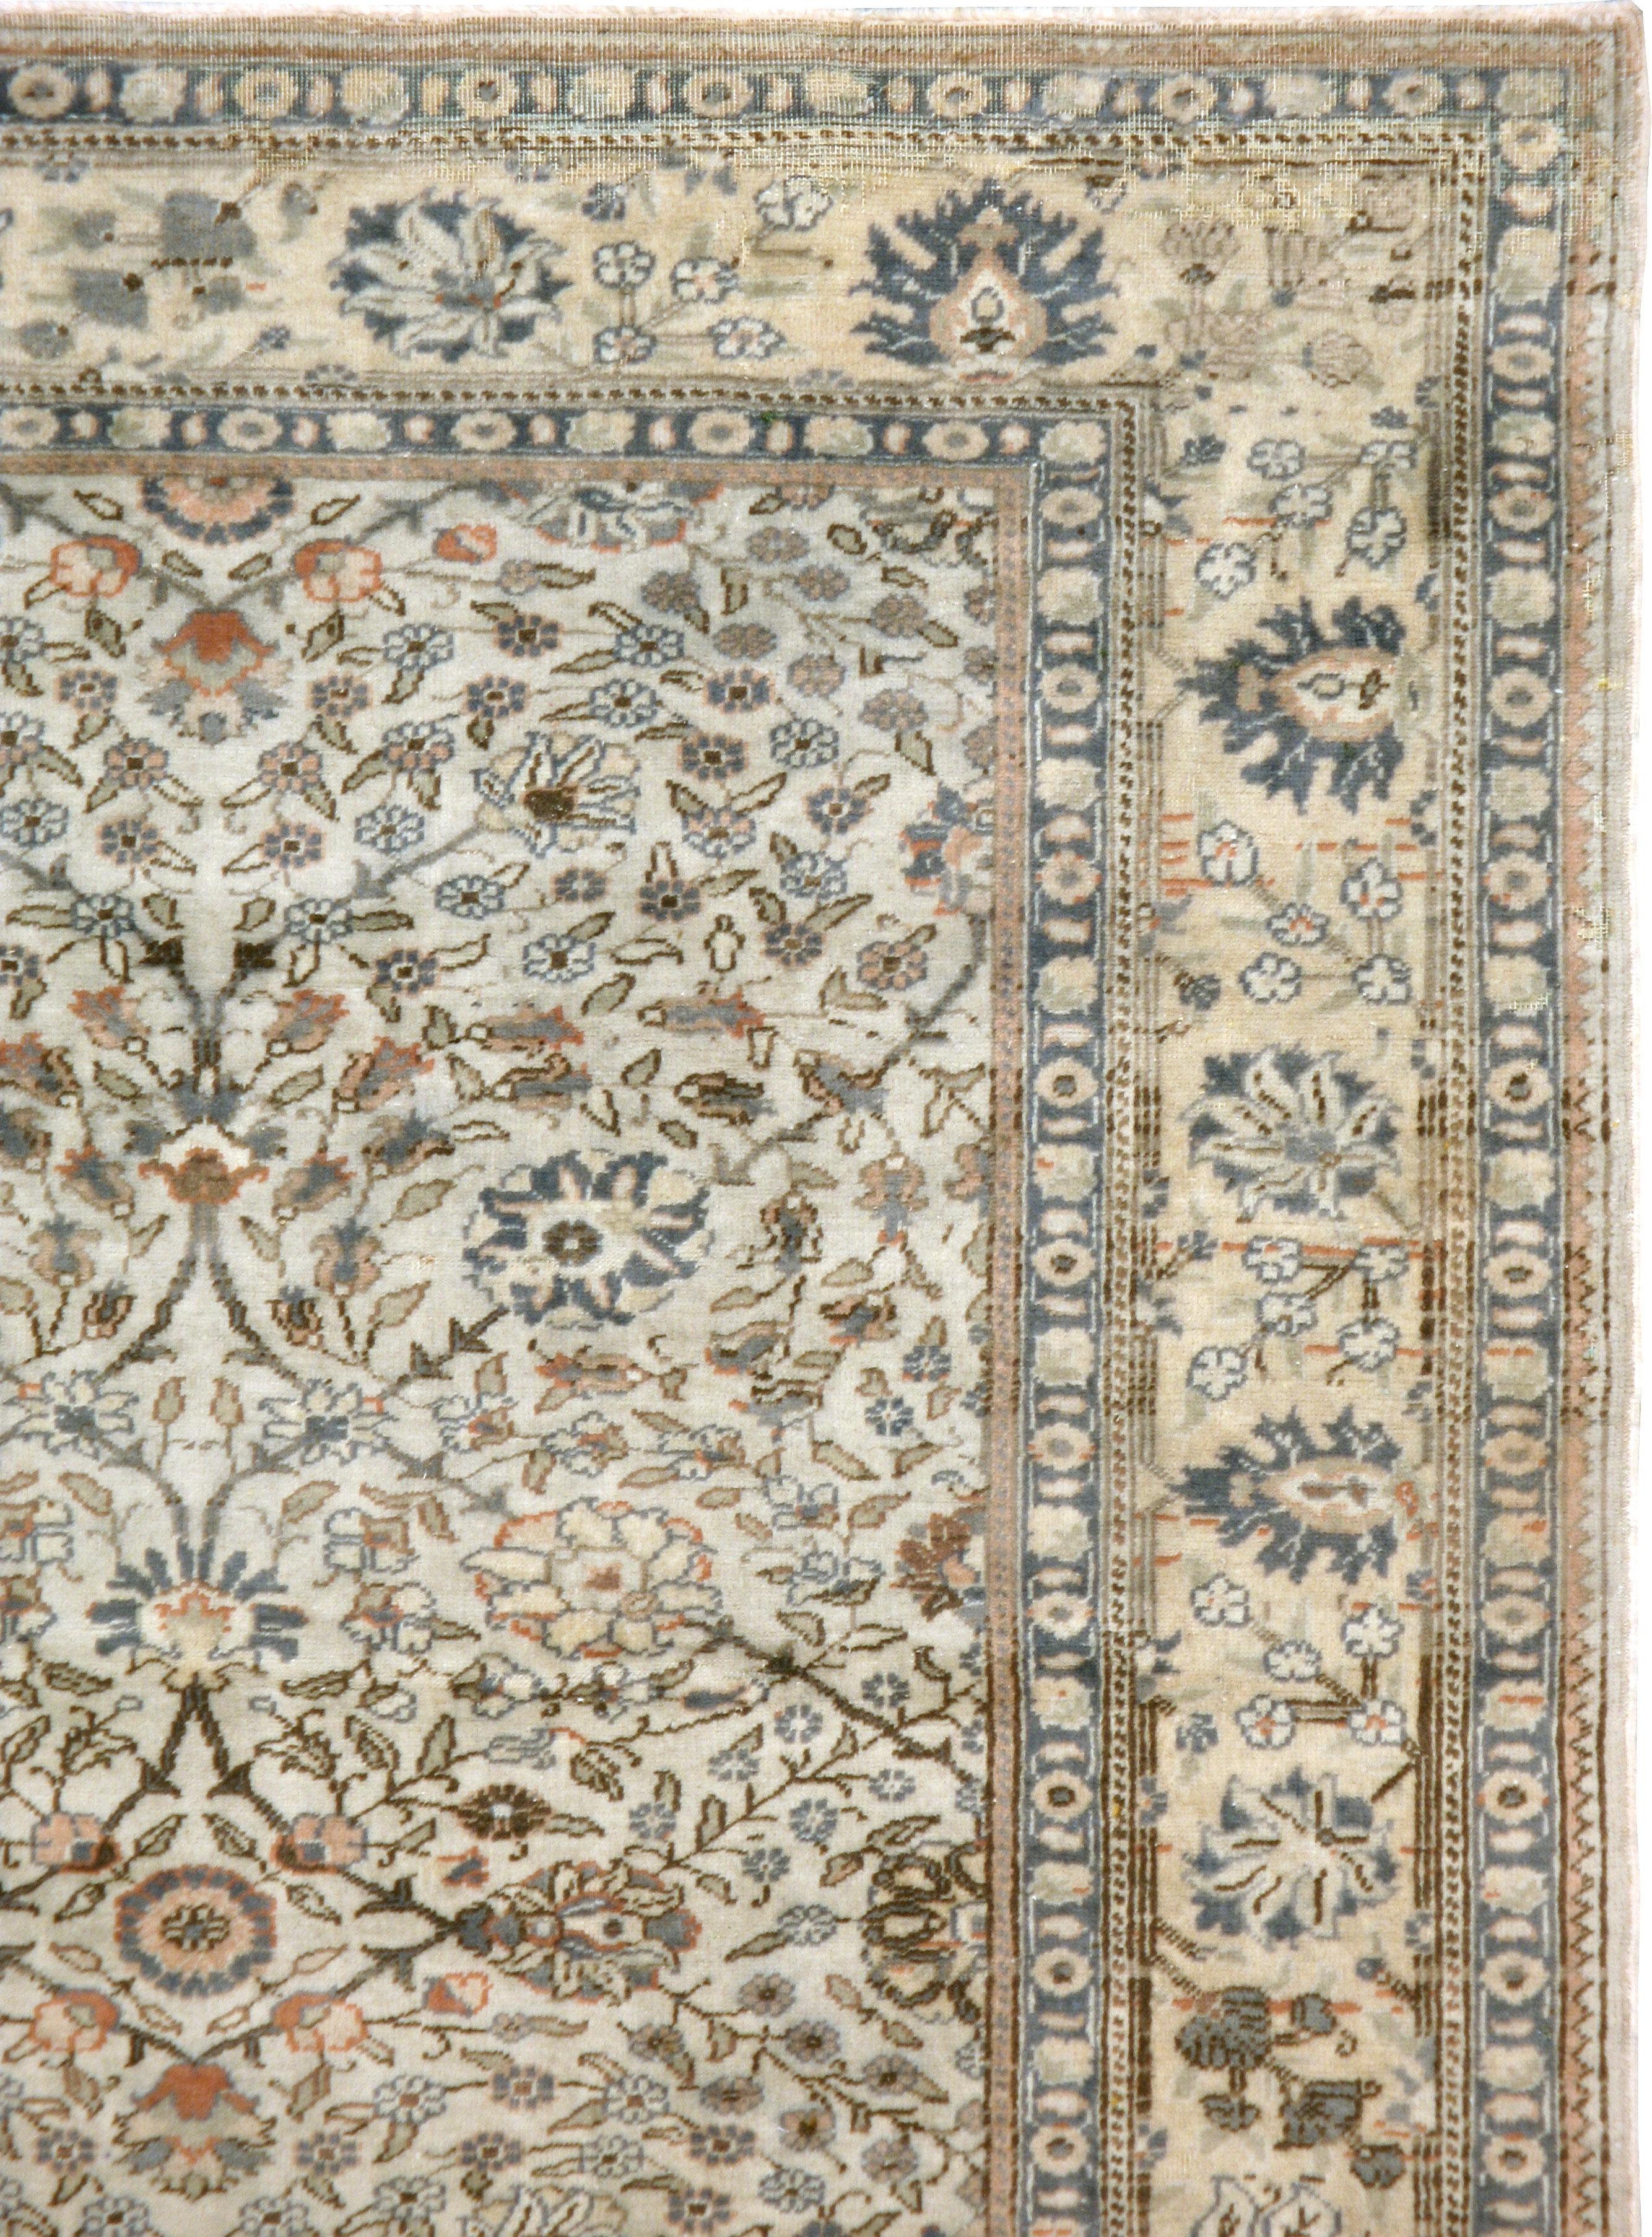 A vintage Turkish Sivas carpet from the mid-20th century. Thin vines and swirls of tiny leaves are the main ornamentations of the ivory ground of this eastern Turkish town rug. The straw yellow main border mixes erect and tilted palmettes with